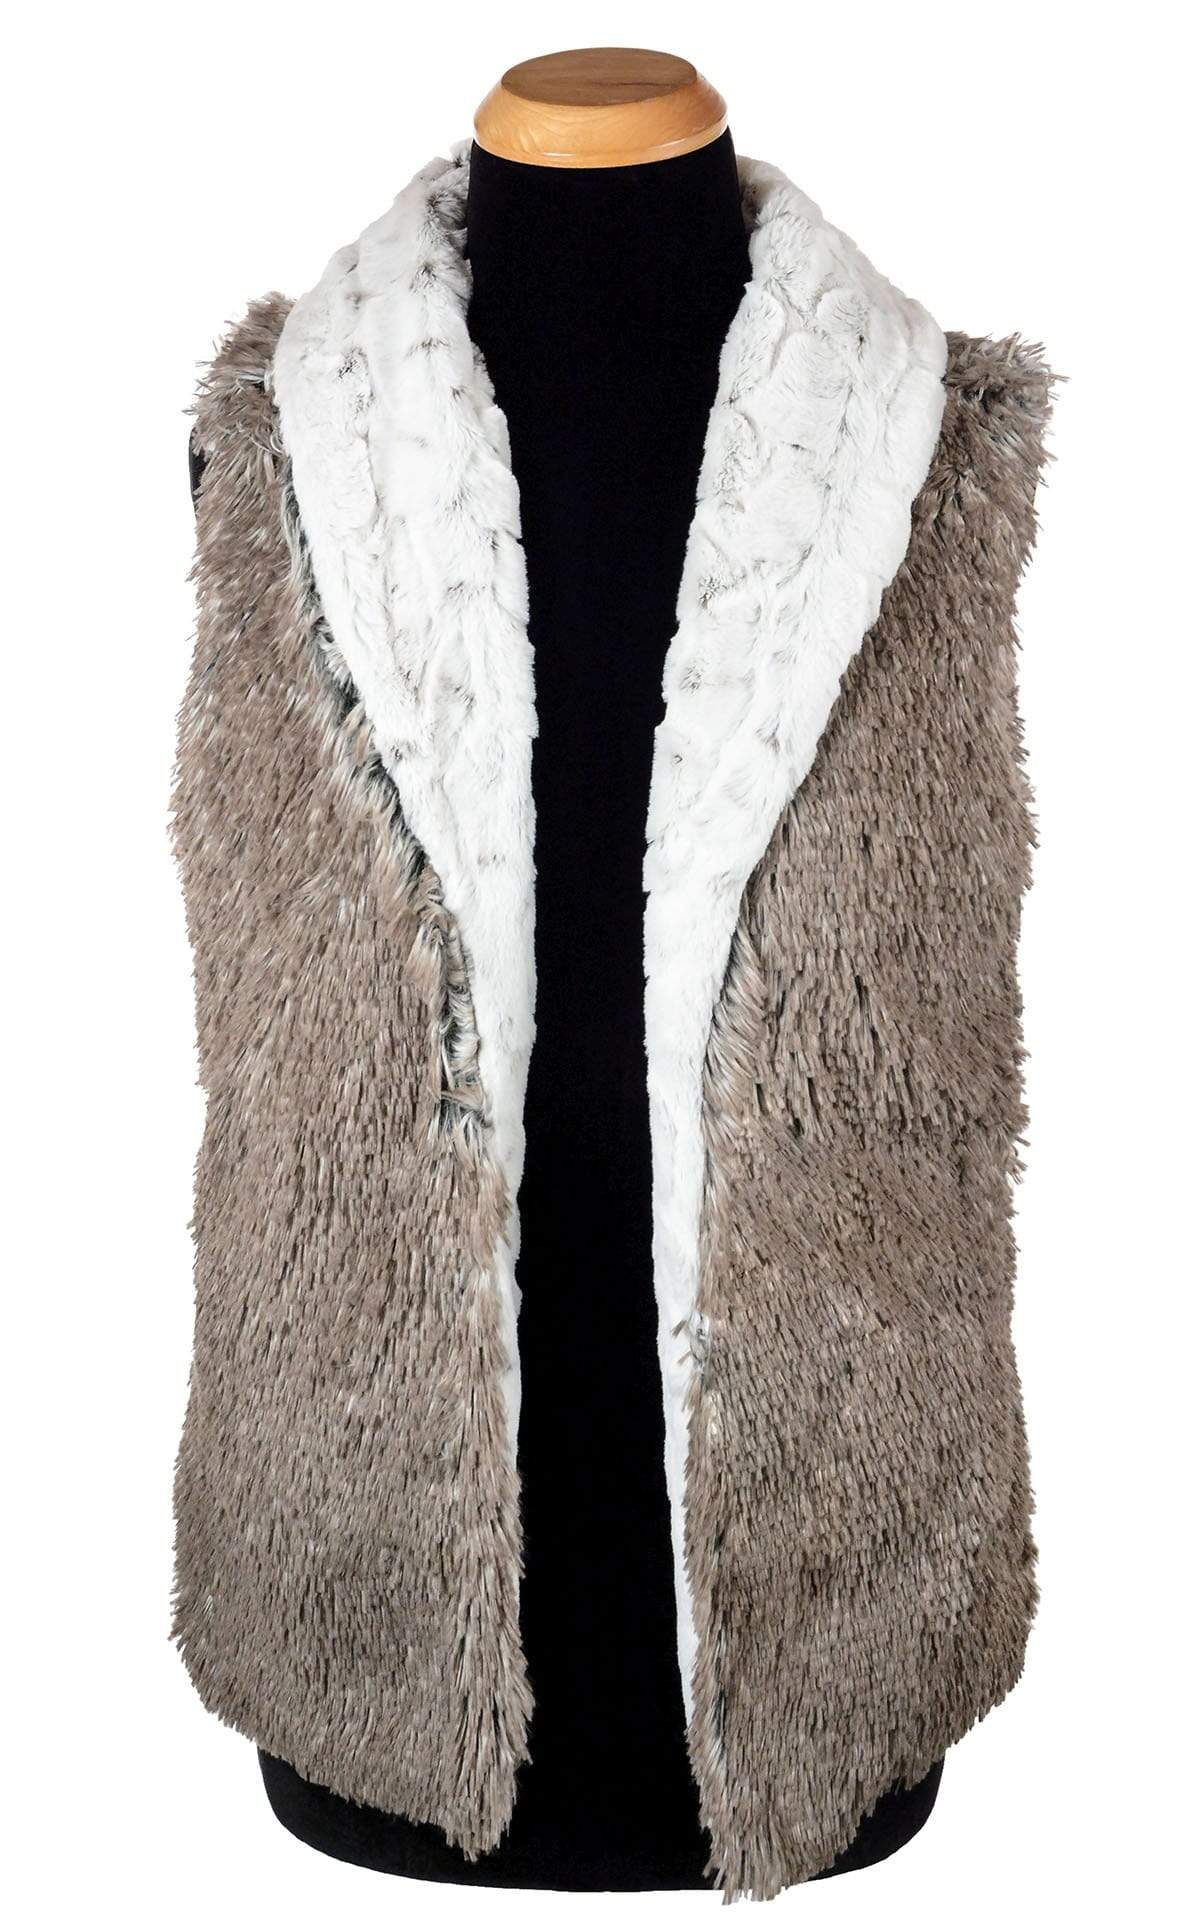 Shawl Collar Vest - Luxury Faux Fur in Winters Frost with Arctic Fox